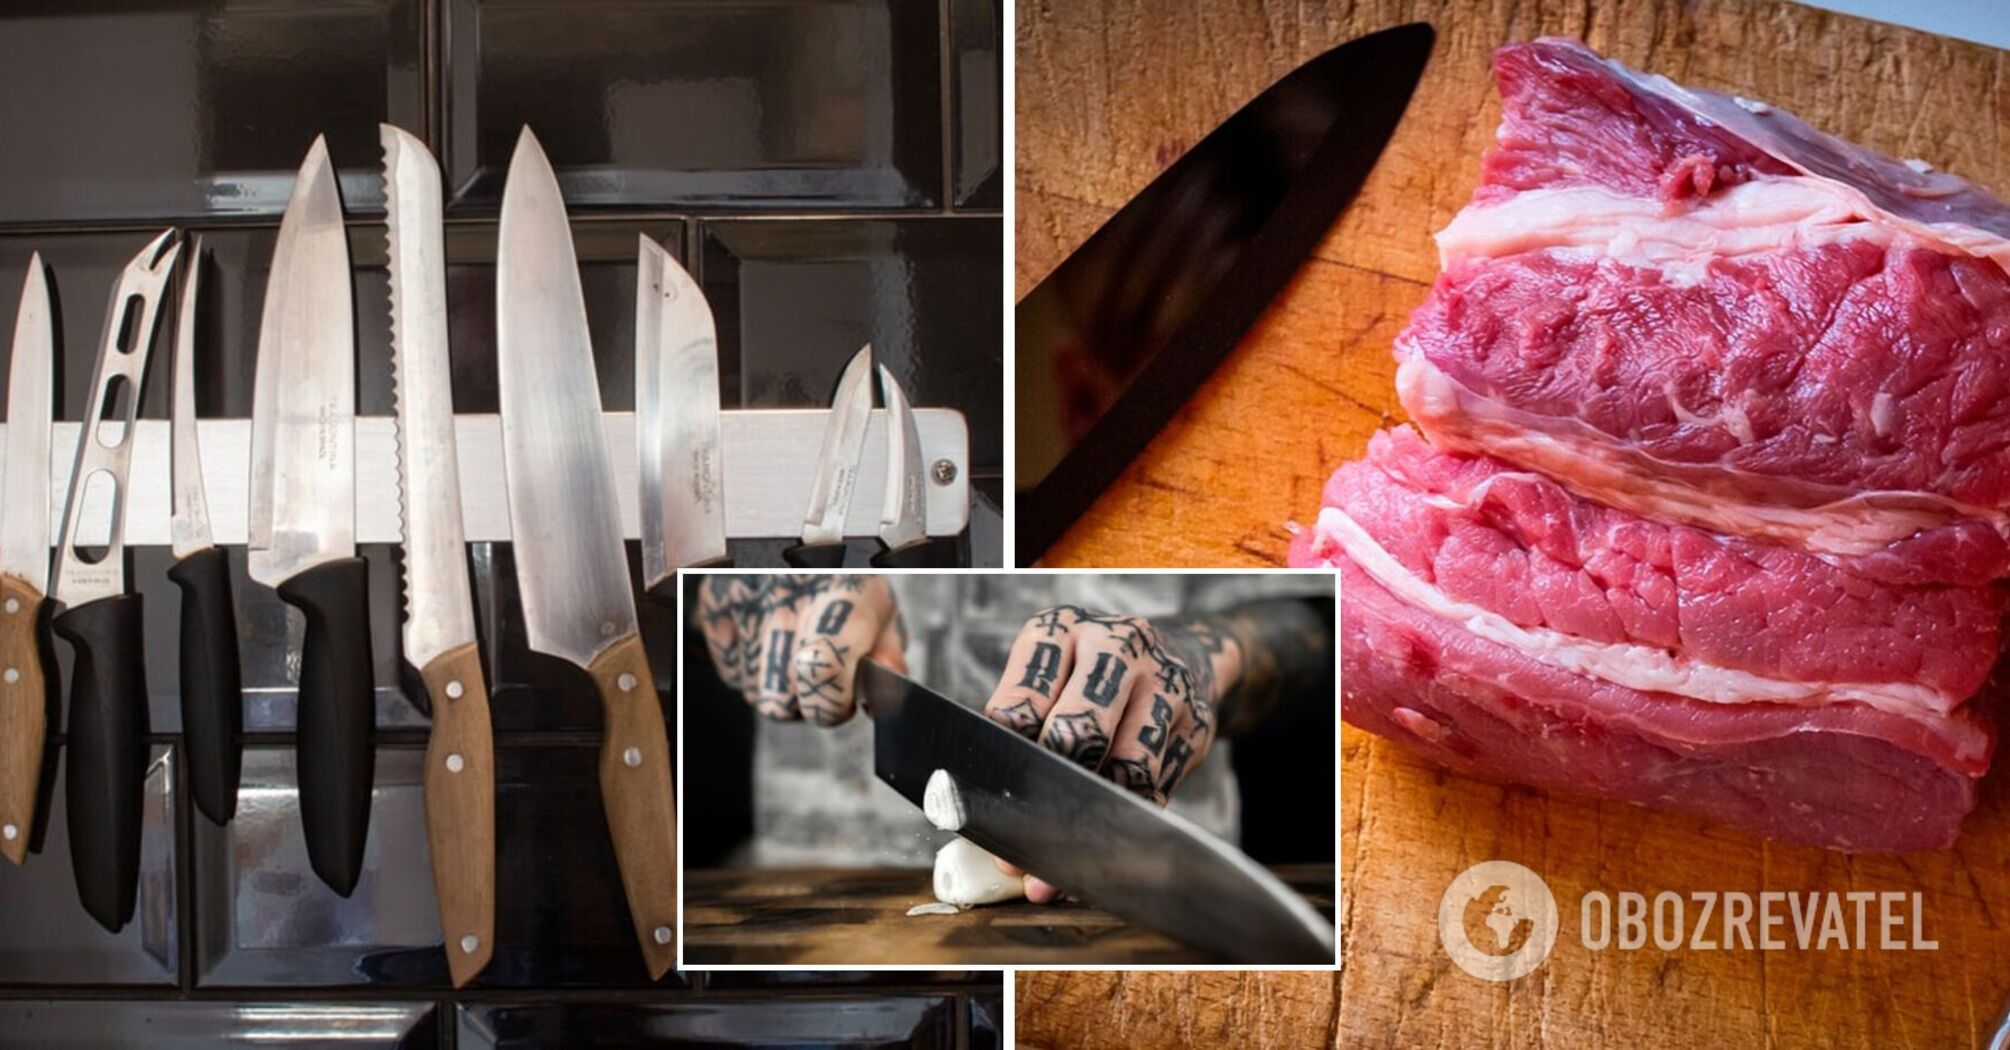 A Wooden Knife Sharper Than Steel? Scientists Say So. - The New